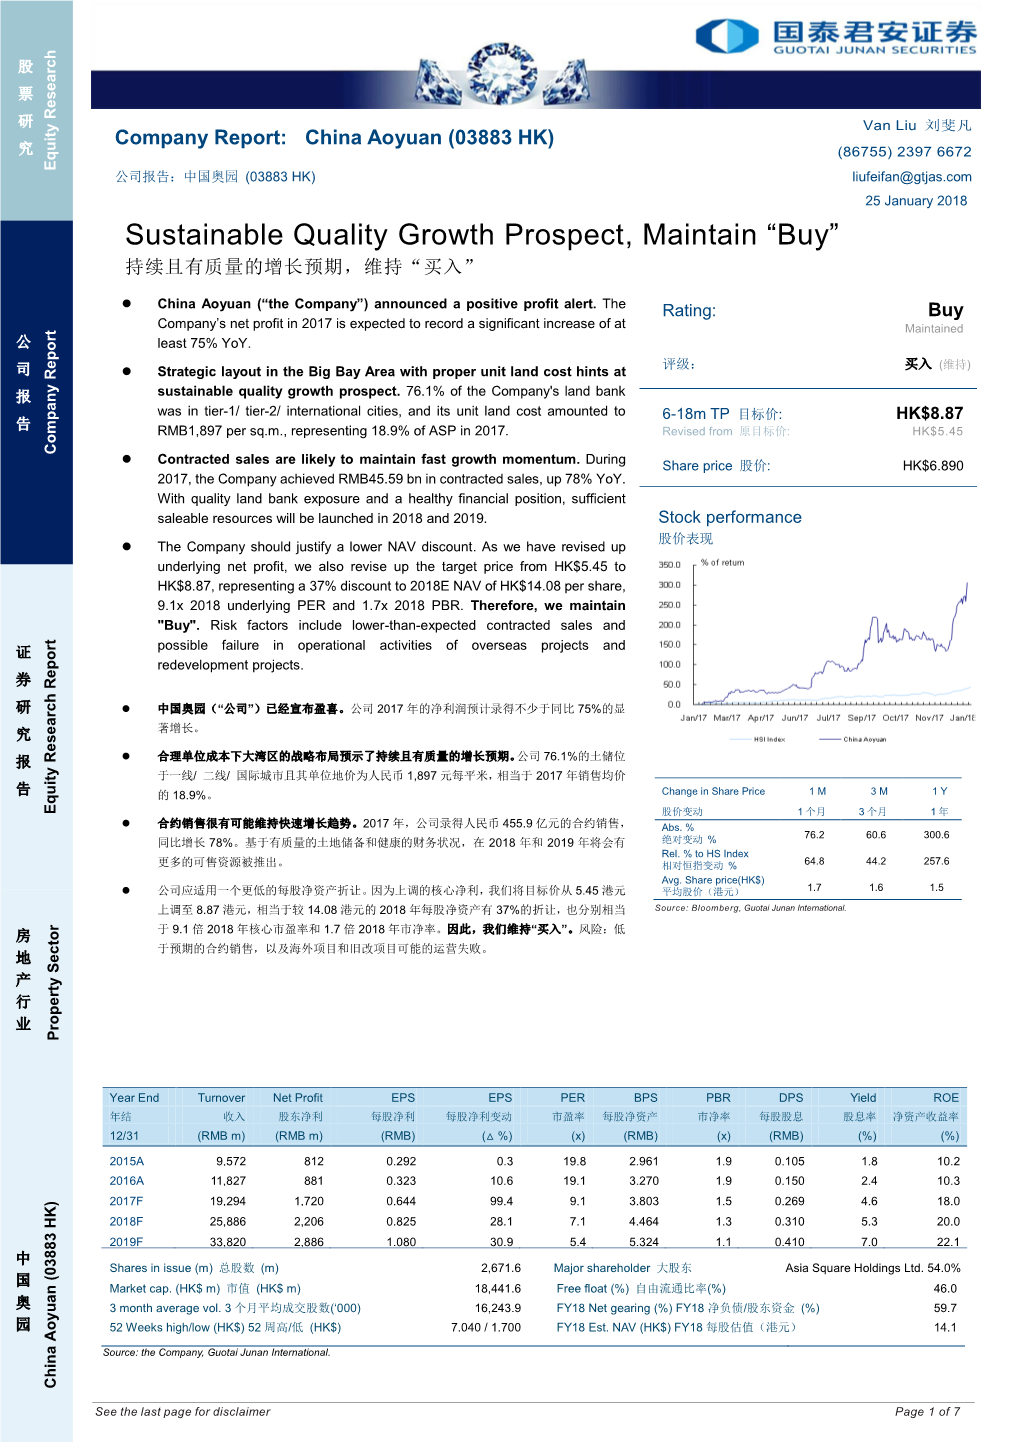 Sustainable Quality Growth Prospect, Maintain “Buy”